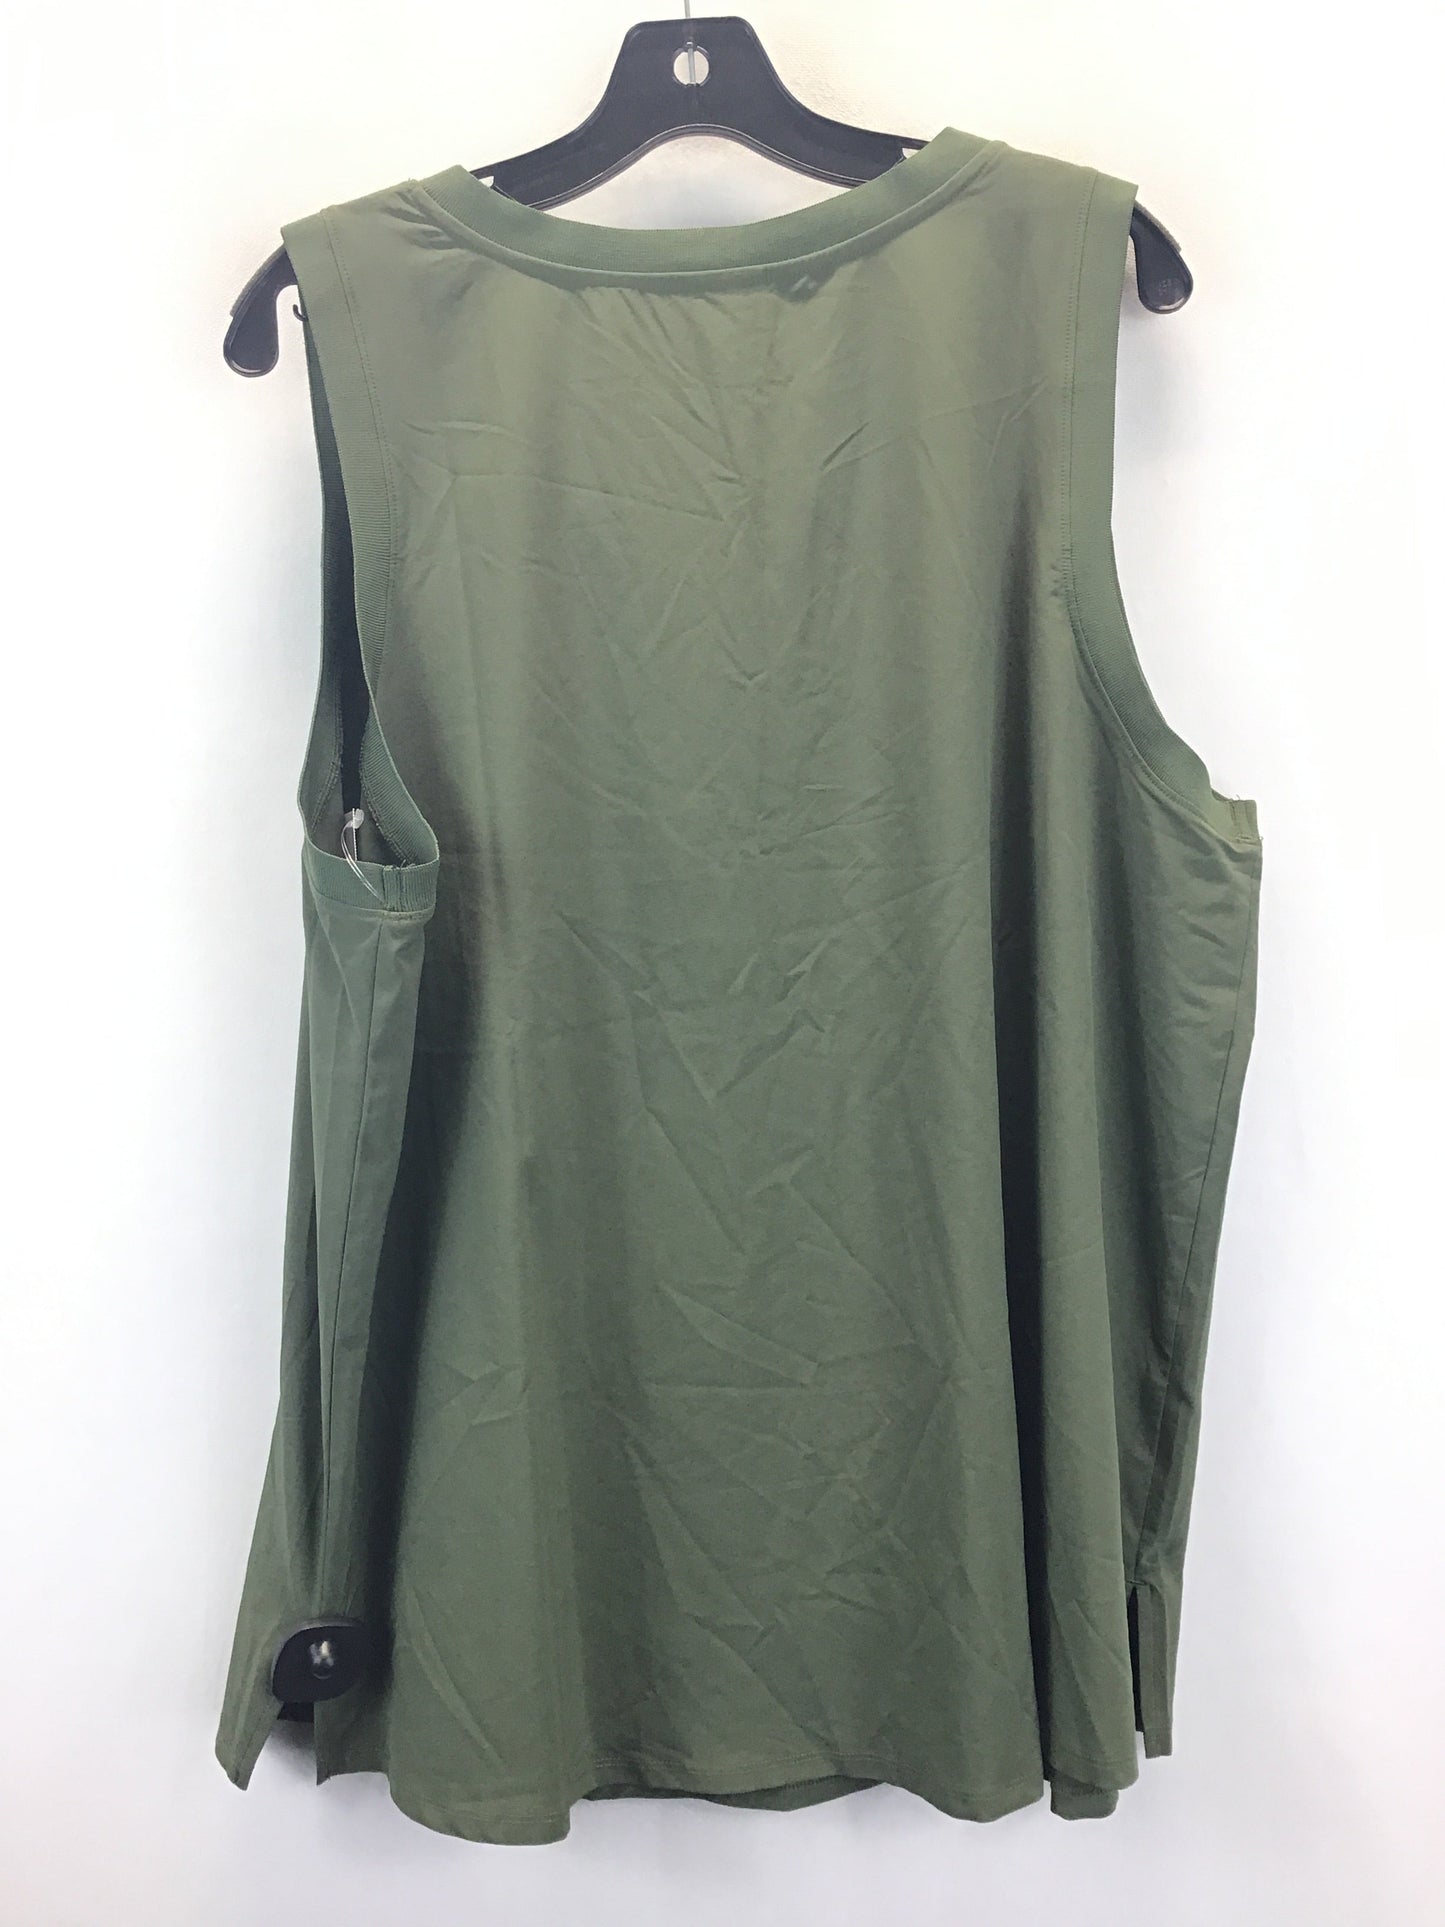 Green Tank Top Chicos, Size 2x